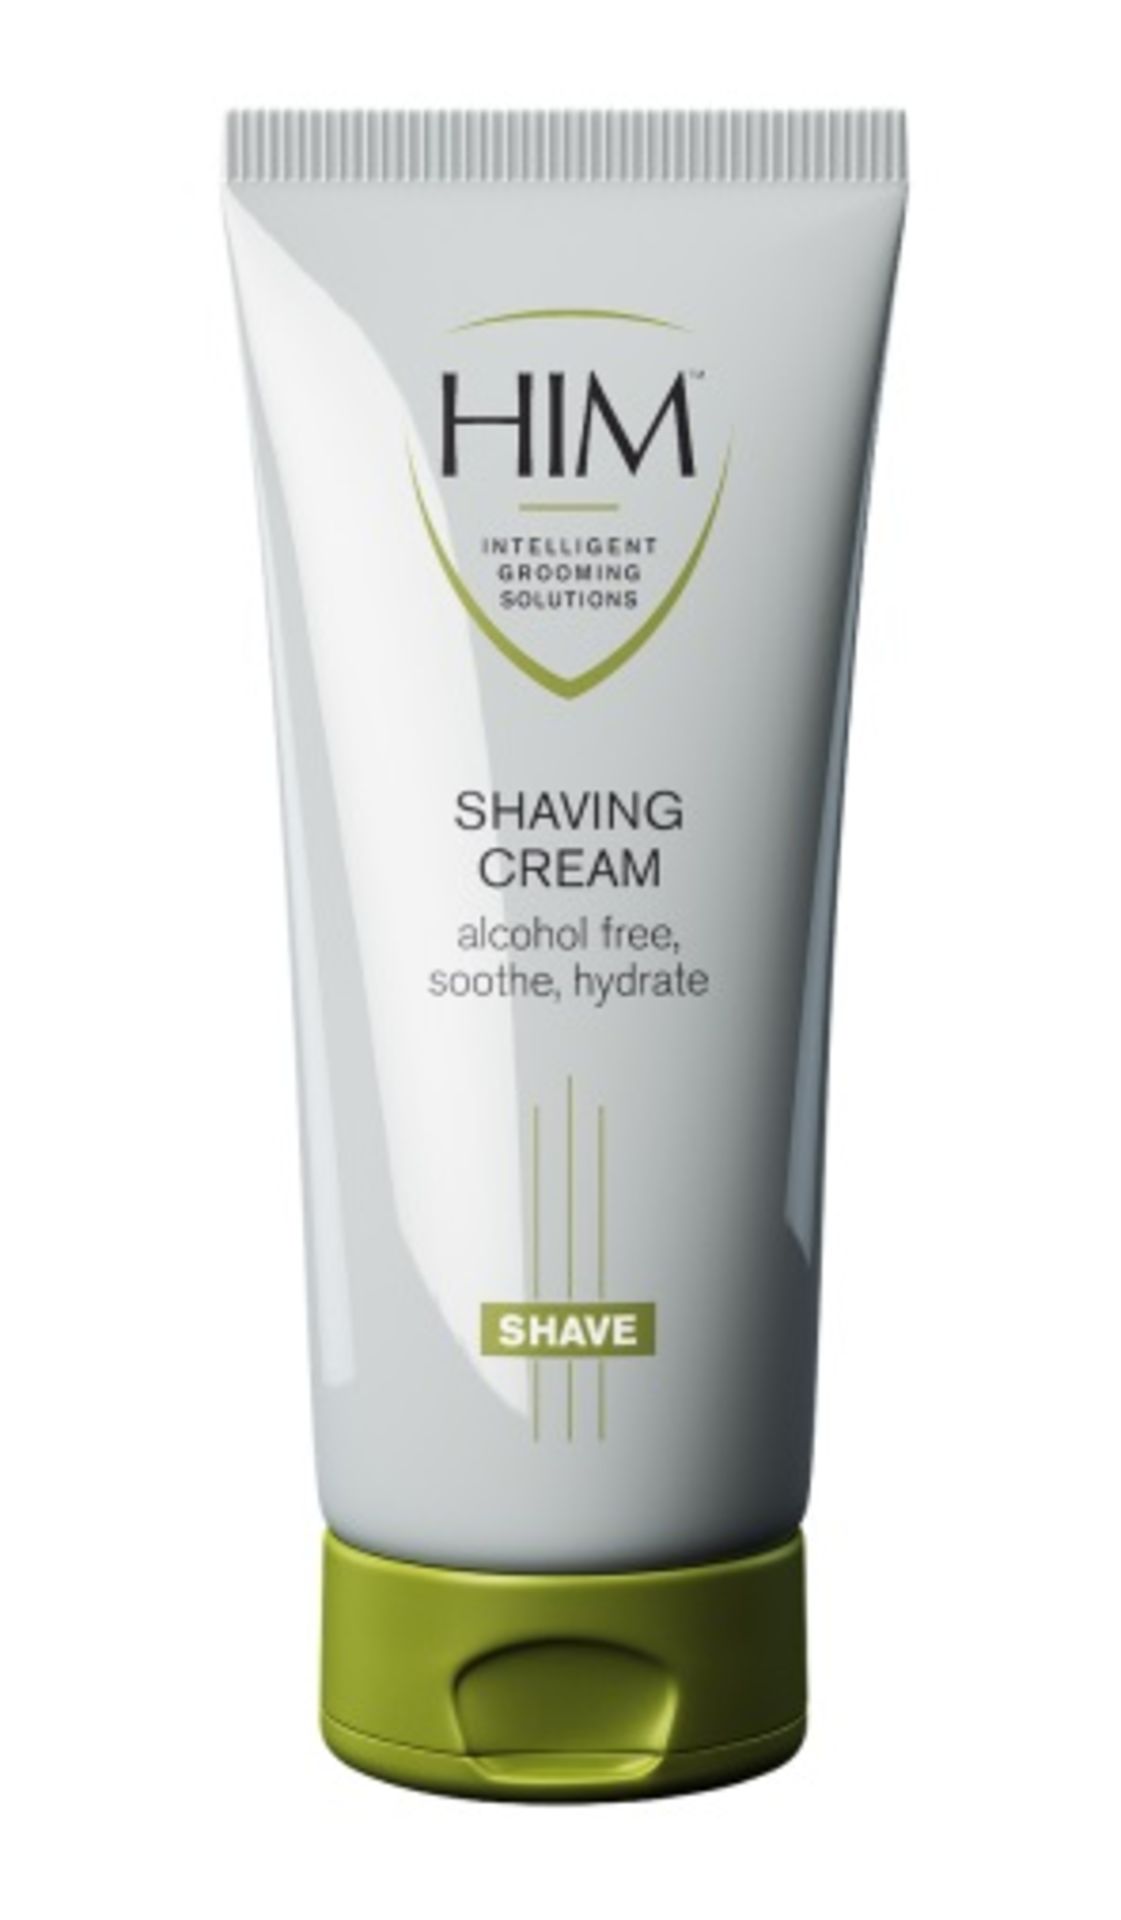 120 x HIM Intelligent Grooming Solutions Products - ASSORTED COLLECTION - Brand New Stock - Hydrate, - Image 12 of 17